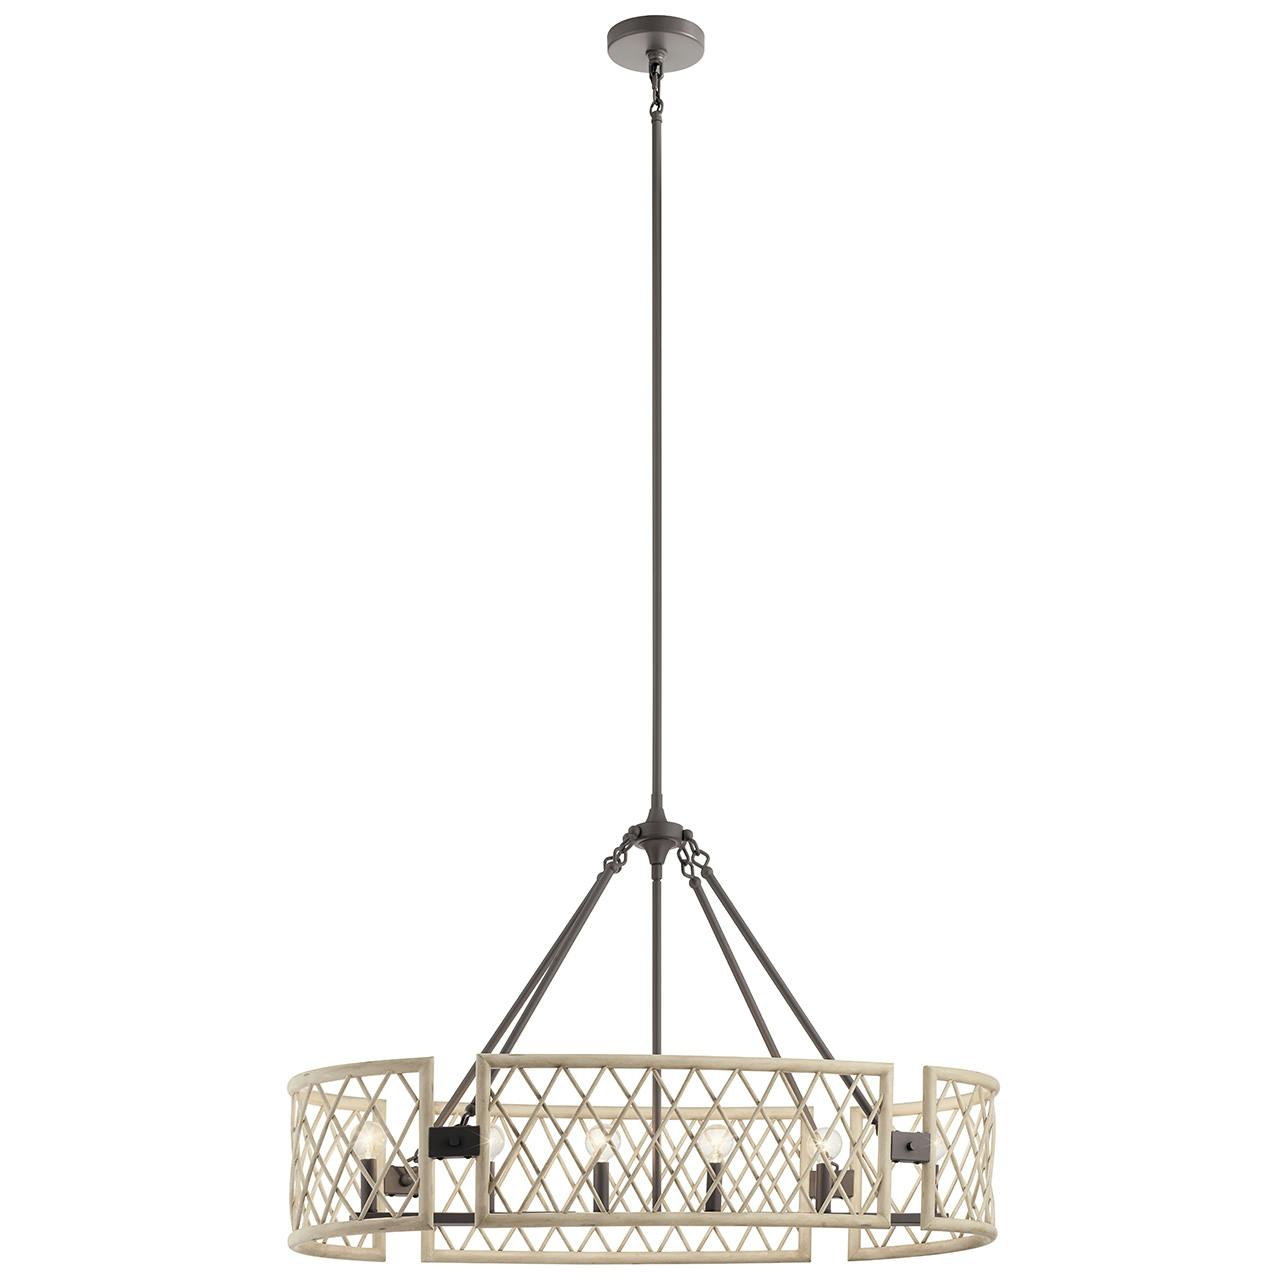 Oana 6 Light Oval Chandelier White Washed on a white background